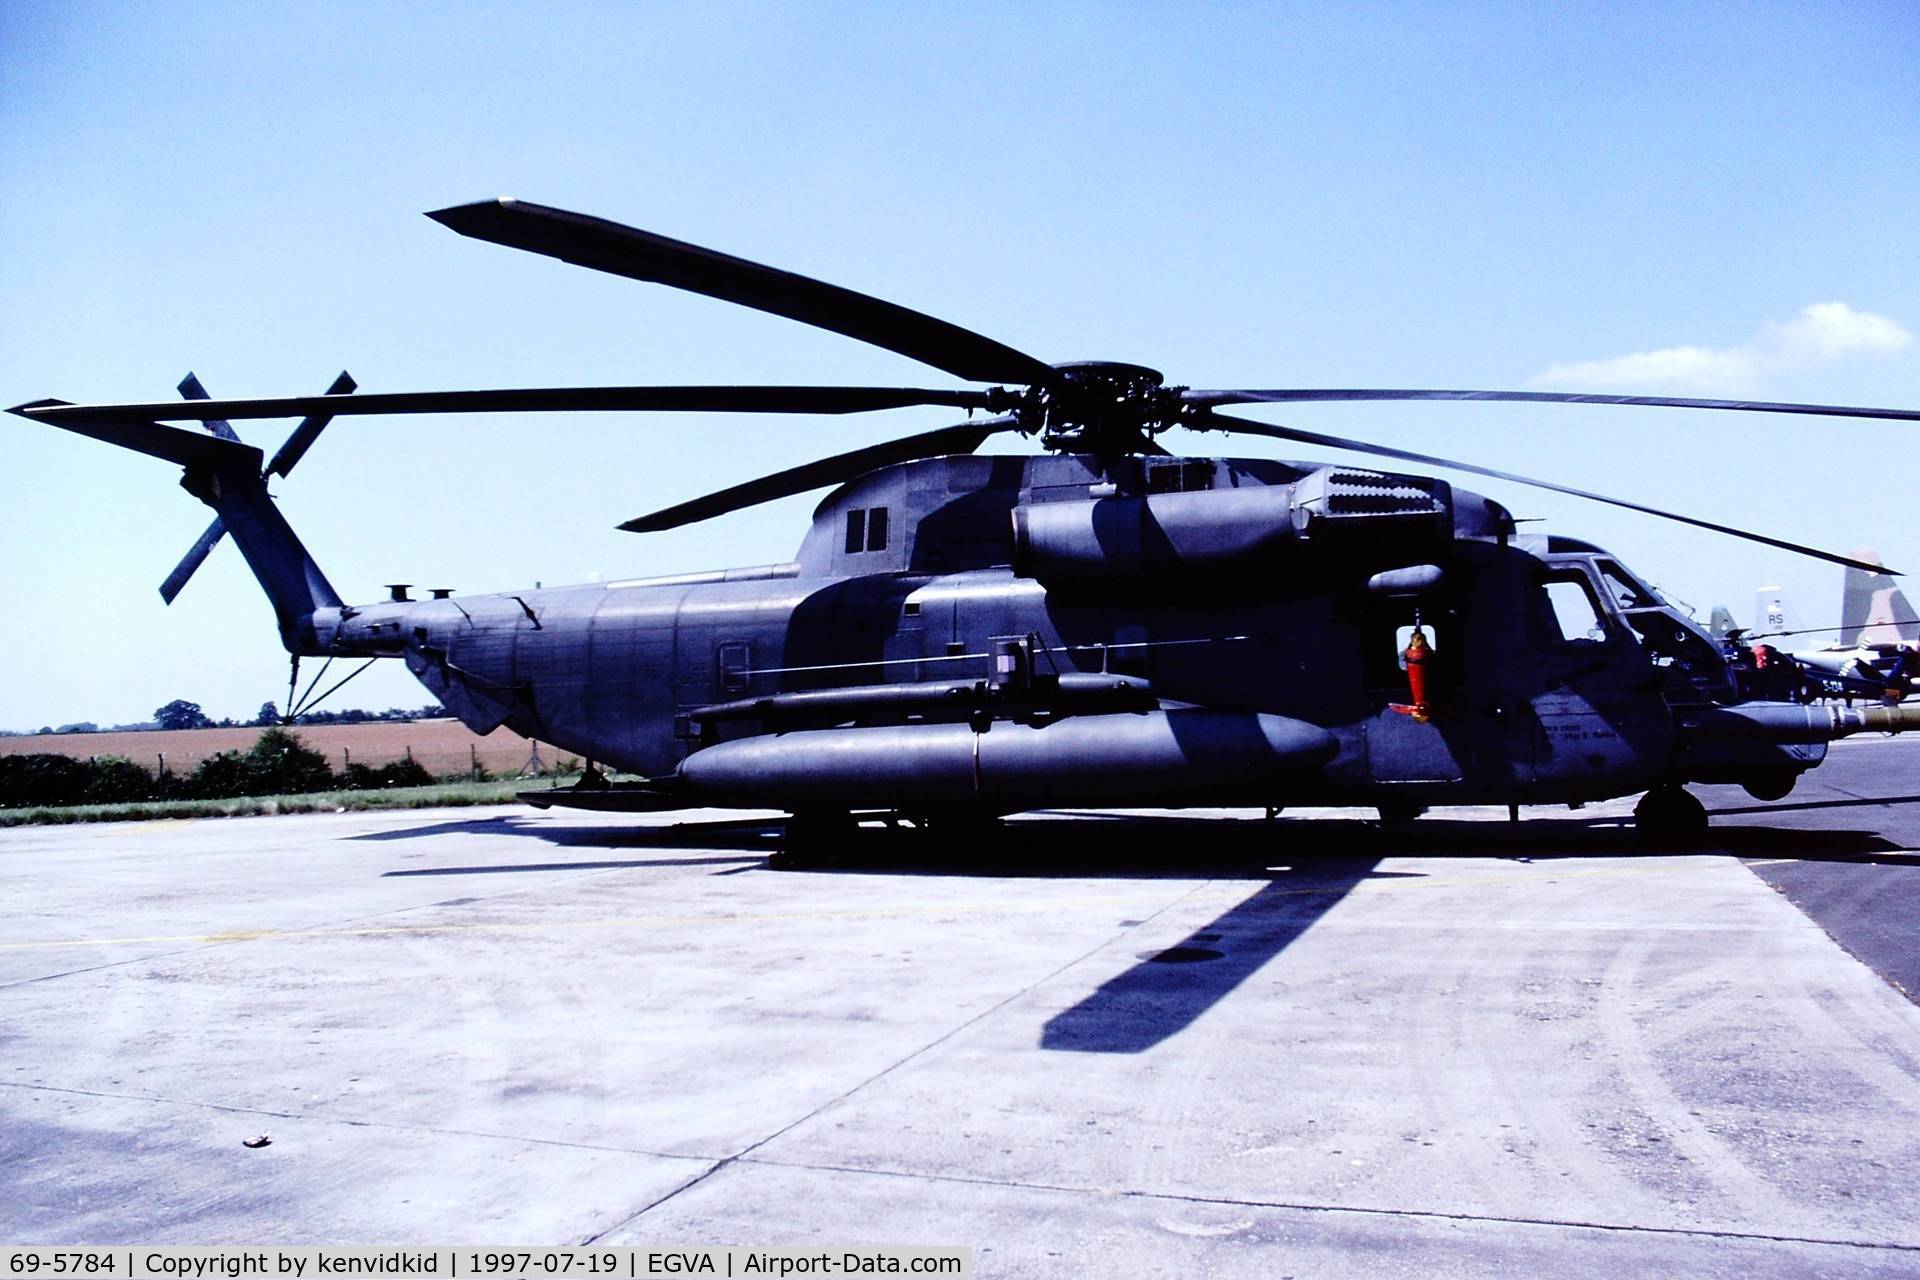 69-5784, 1969 Sikorsky MH-53J Pave Low III C/N 65-232, At the 1997 Royal International Air Tattoo.